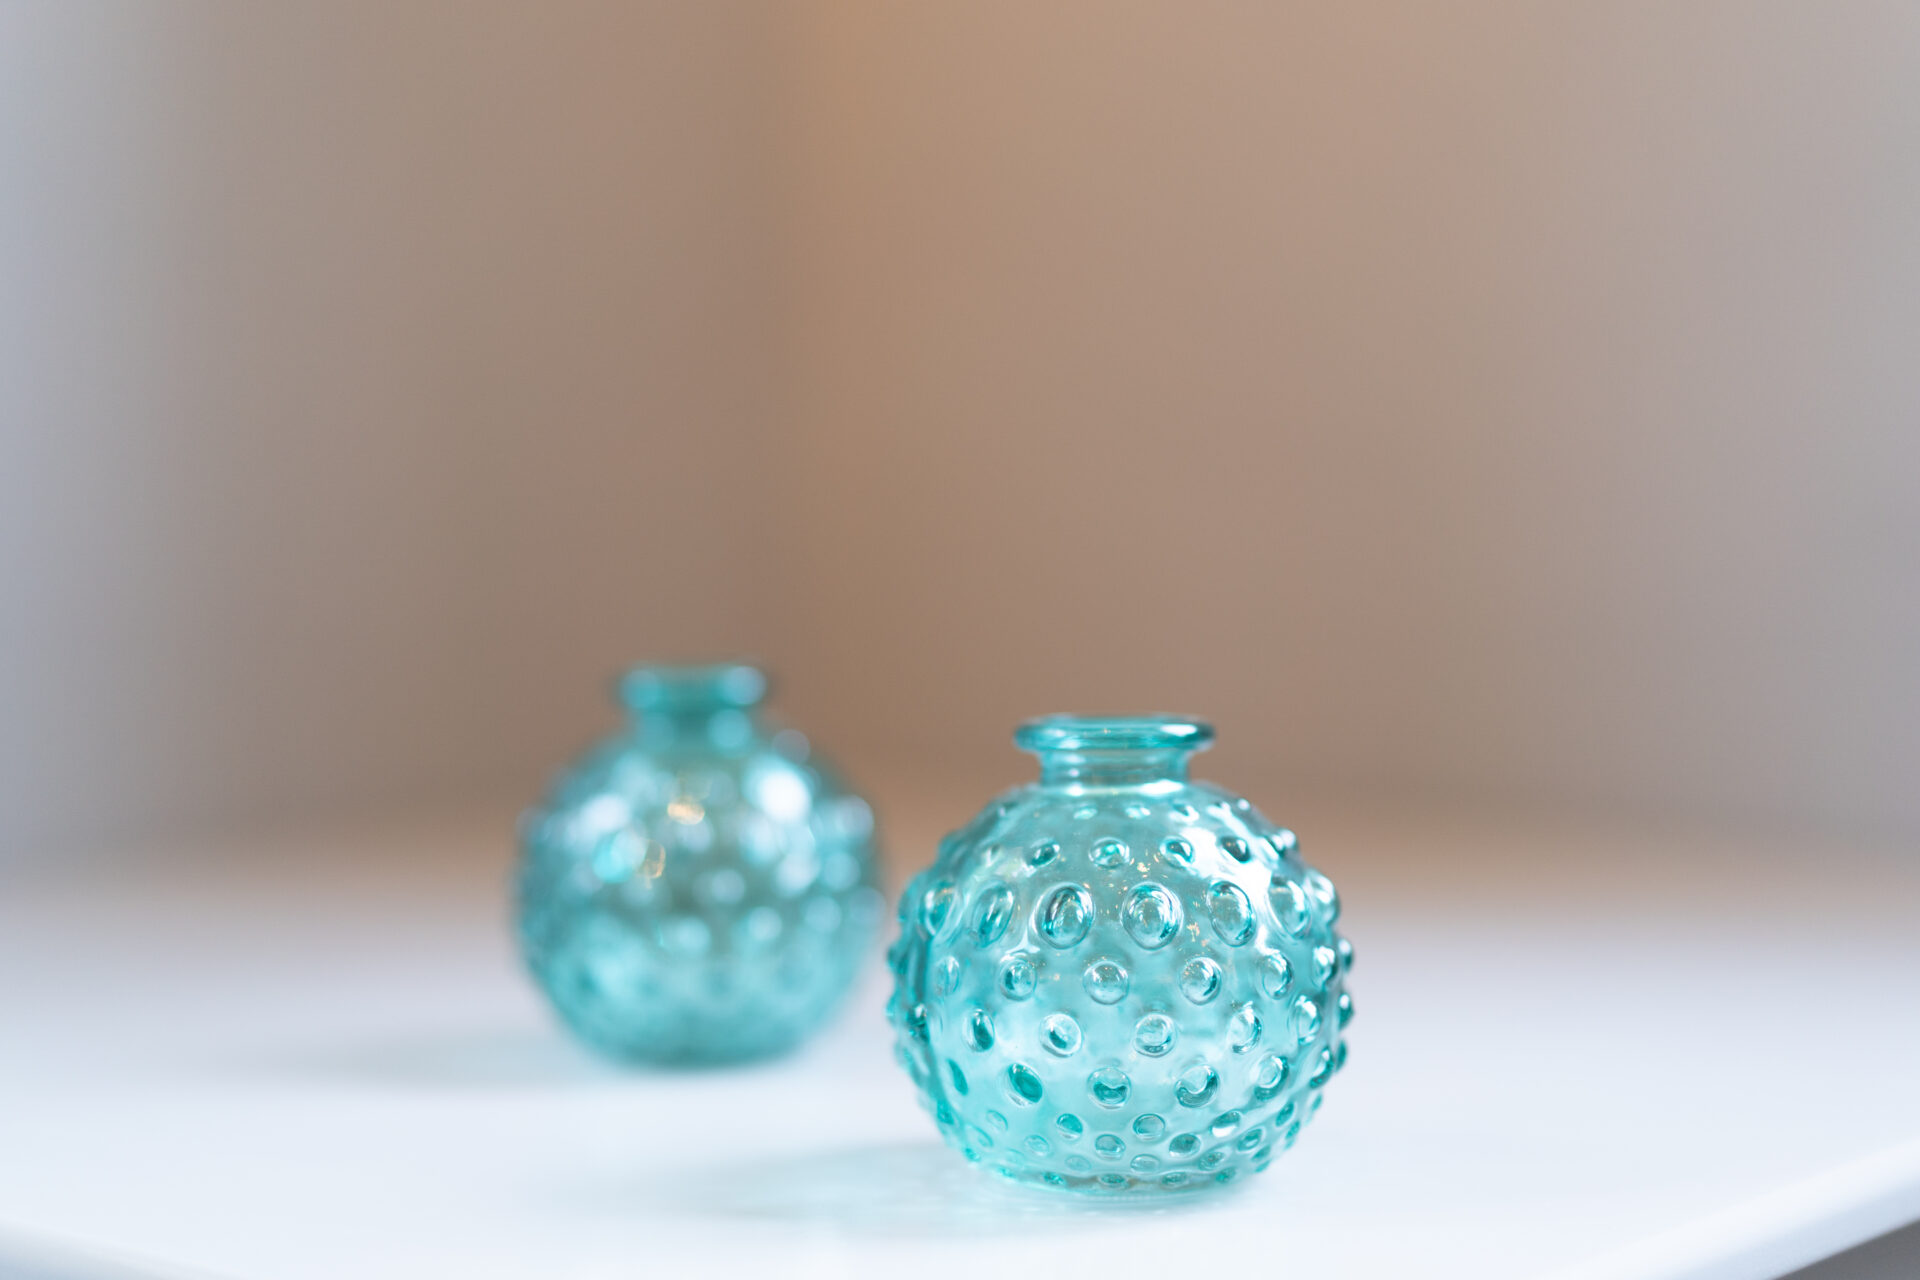 Two small blue glass vases sitting on a table.